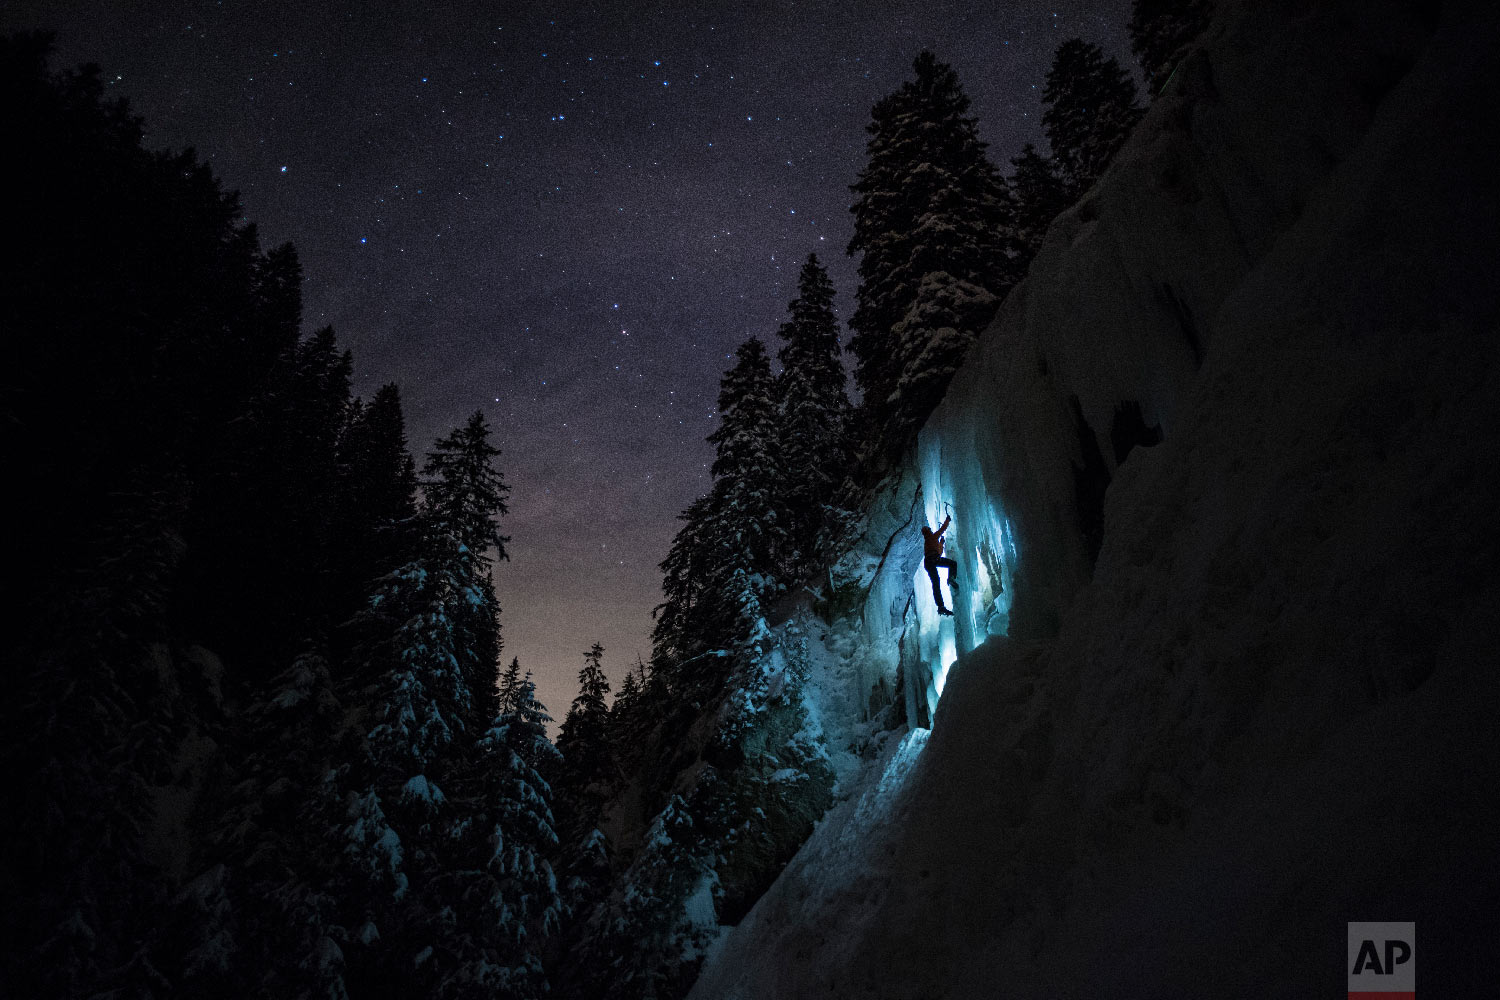  Pierre, a member of Team Arnicare, climbs an Ice Cascade during a night-time training session under a stary night near La Lecherette in the Hongrin region, in canton Vaud, Switzerland on Feb. 14, 2018. (Anthony Anex/Keystone via AP) 